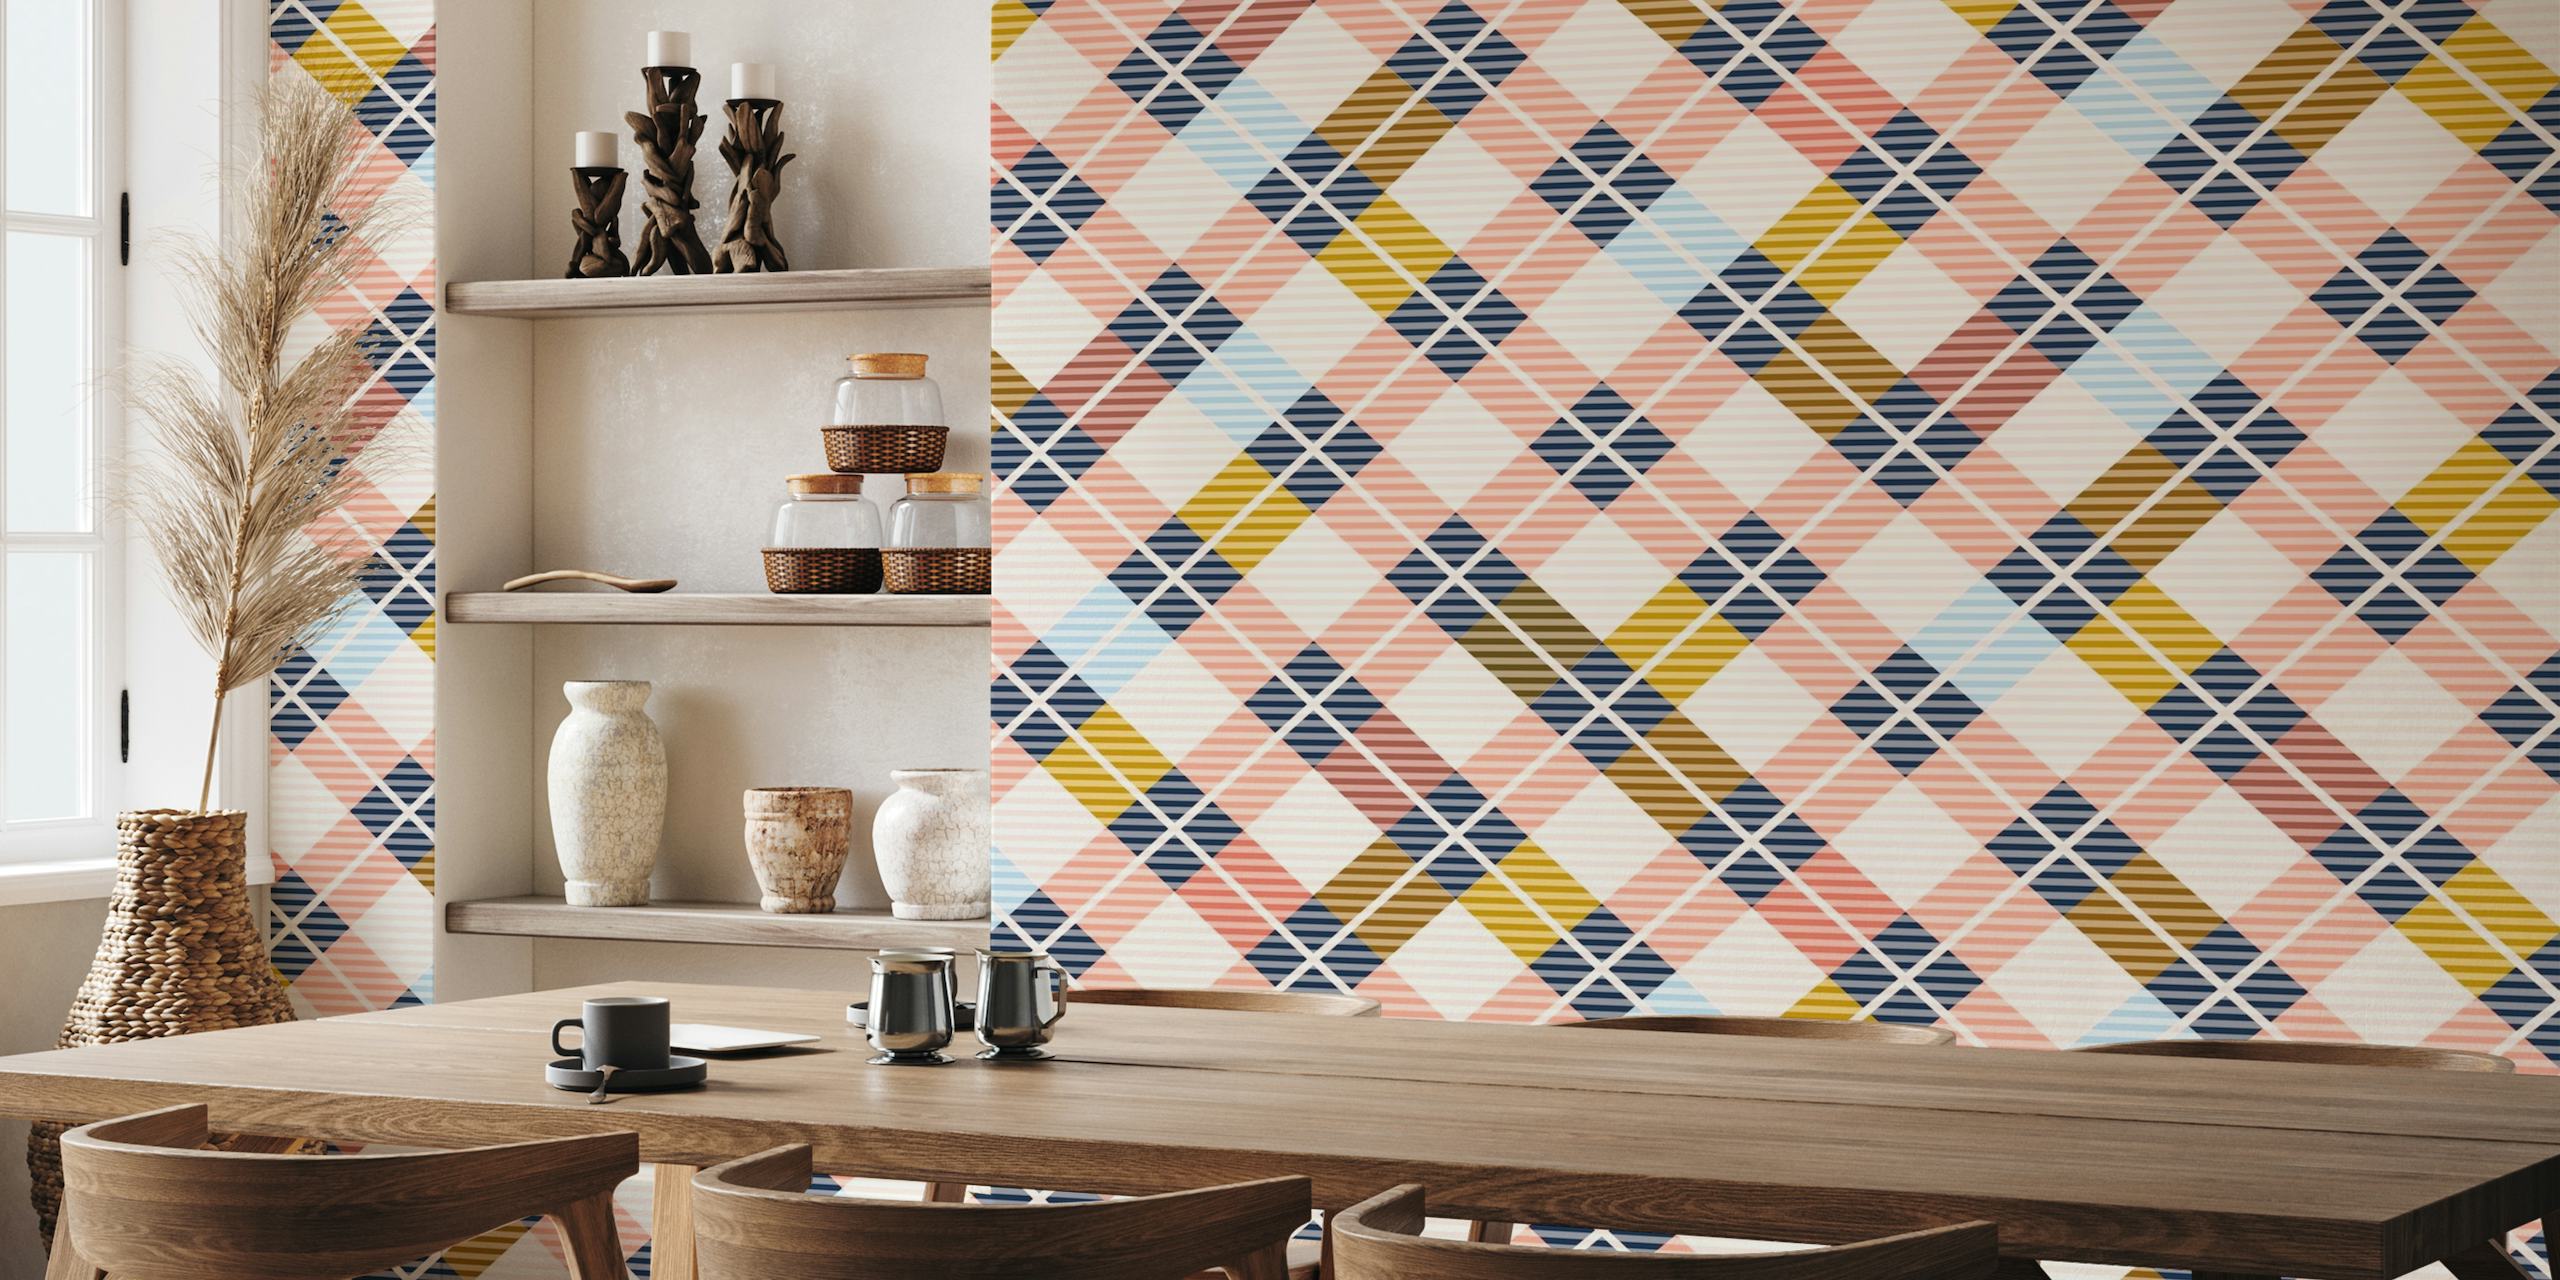 Plaid pattern wall mural in pink, mustard, navy blue, and coral colors